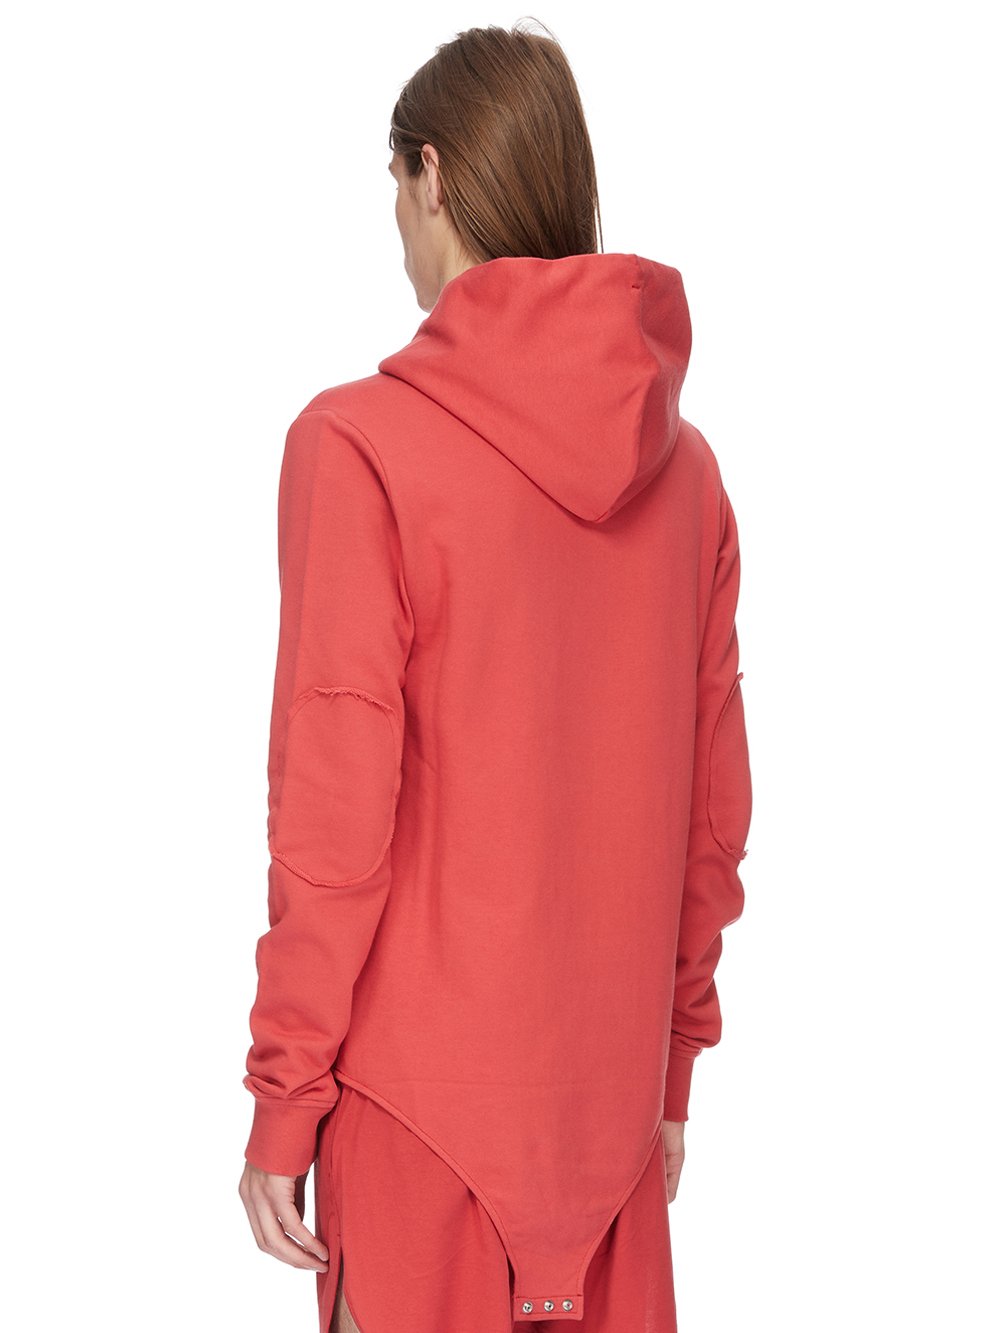 CHAMPION X RICK OWENS HOODED BODY IN CARNELIAN RED COMPACT COTTON FELPA